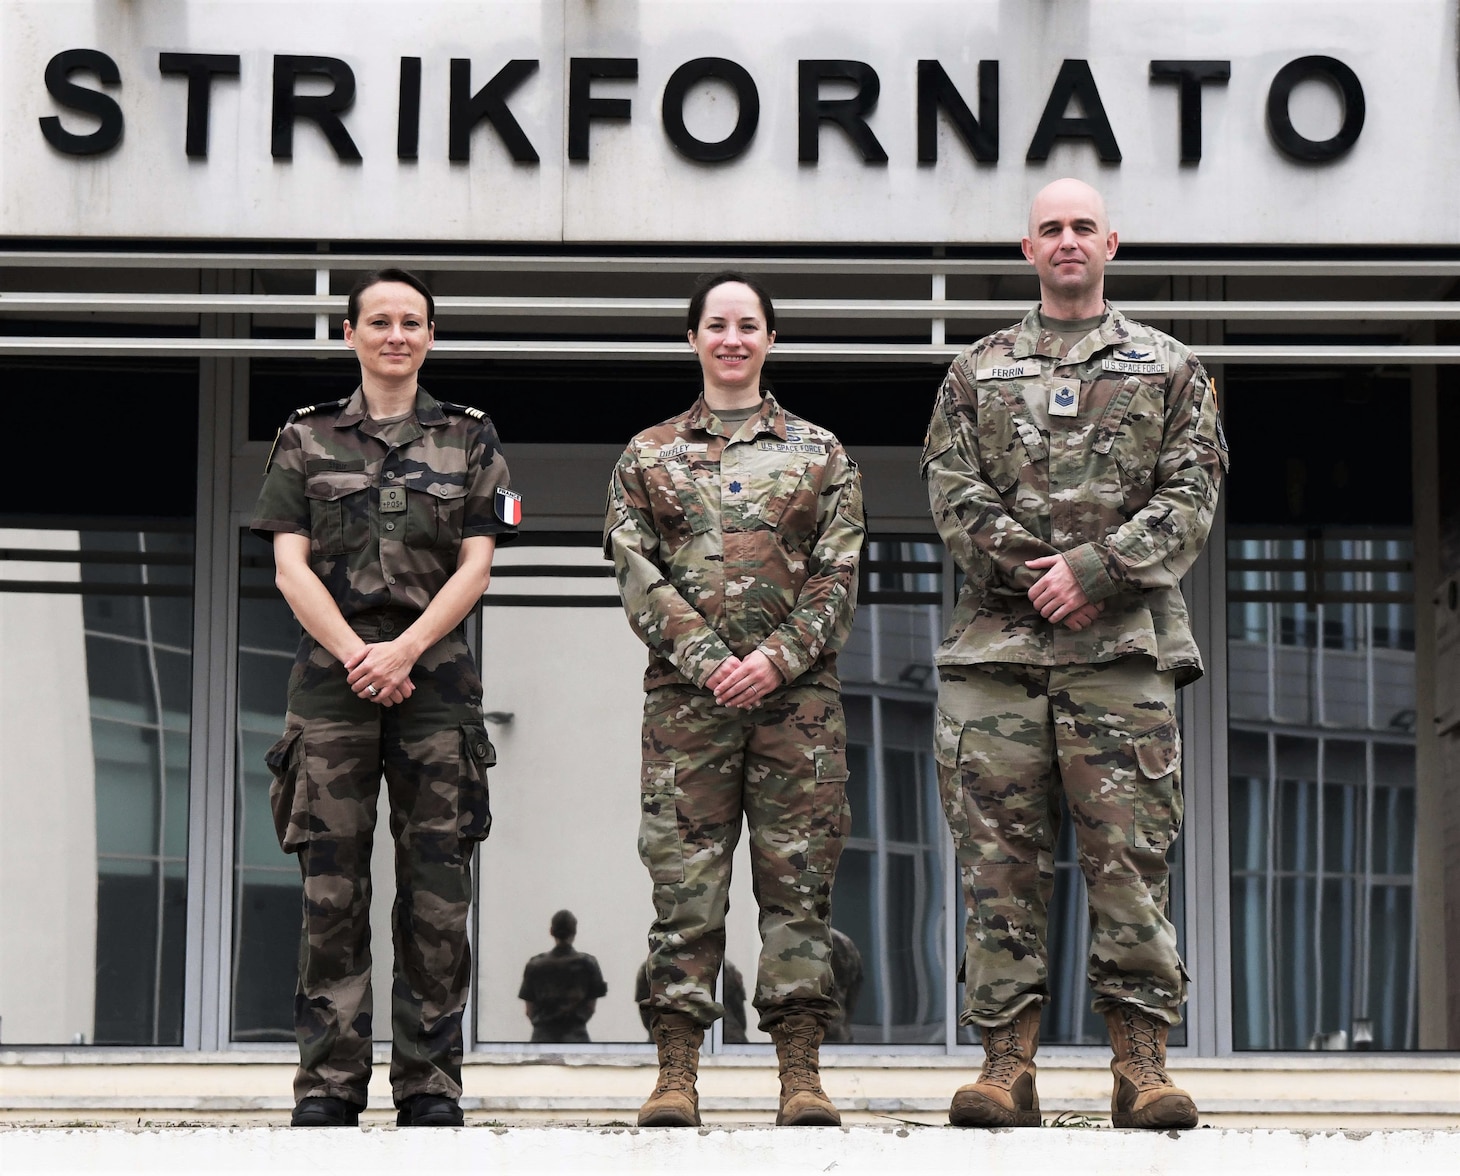 French Air Force Maj. Cécile Stolle and U.S. Space Force Lt. Col. Caitlin Diffley, from the NATO Space Centre in Ramstein, Germany, and Tech. Sgt. Braden Ferrin from U.S. Air Forces in Europe, pose for a photo on Naval Striking and Support Forces NATO base, Portugal, June 14, 2022.